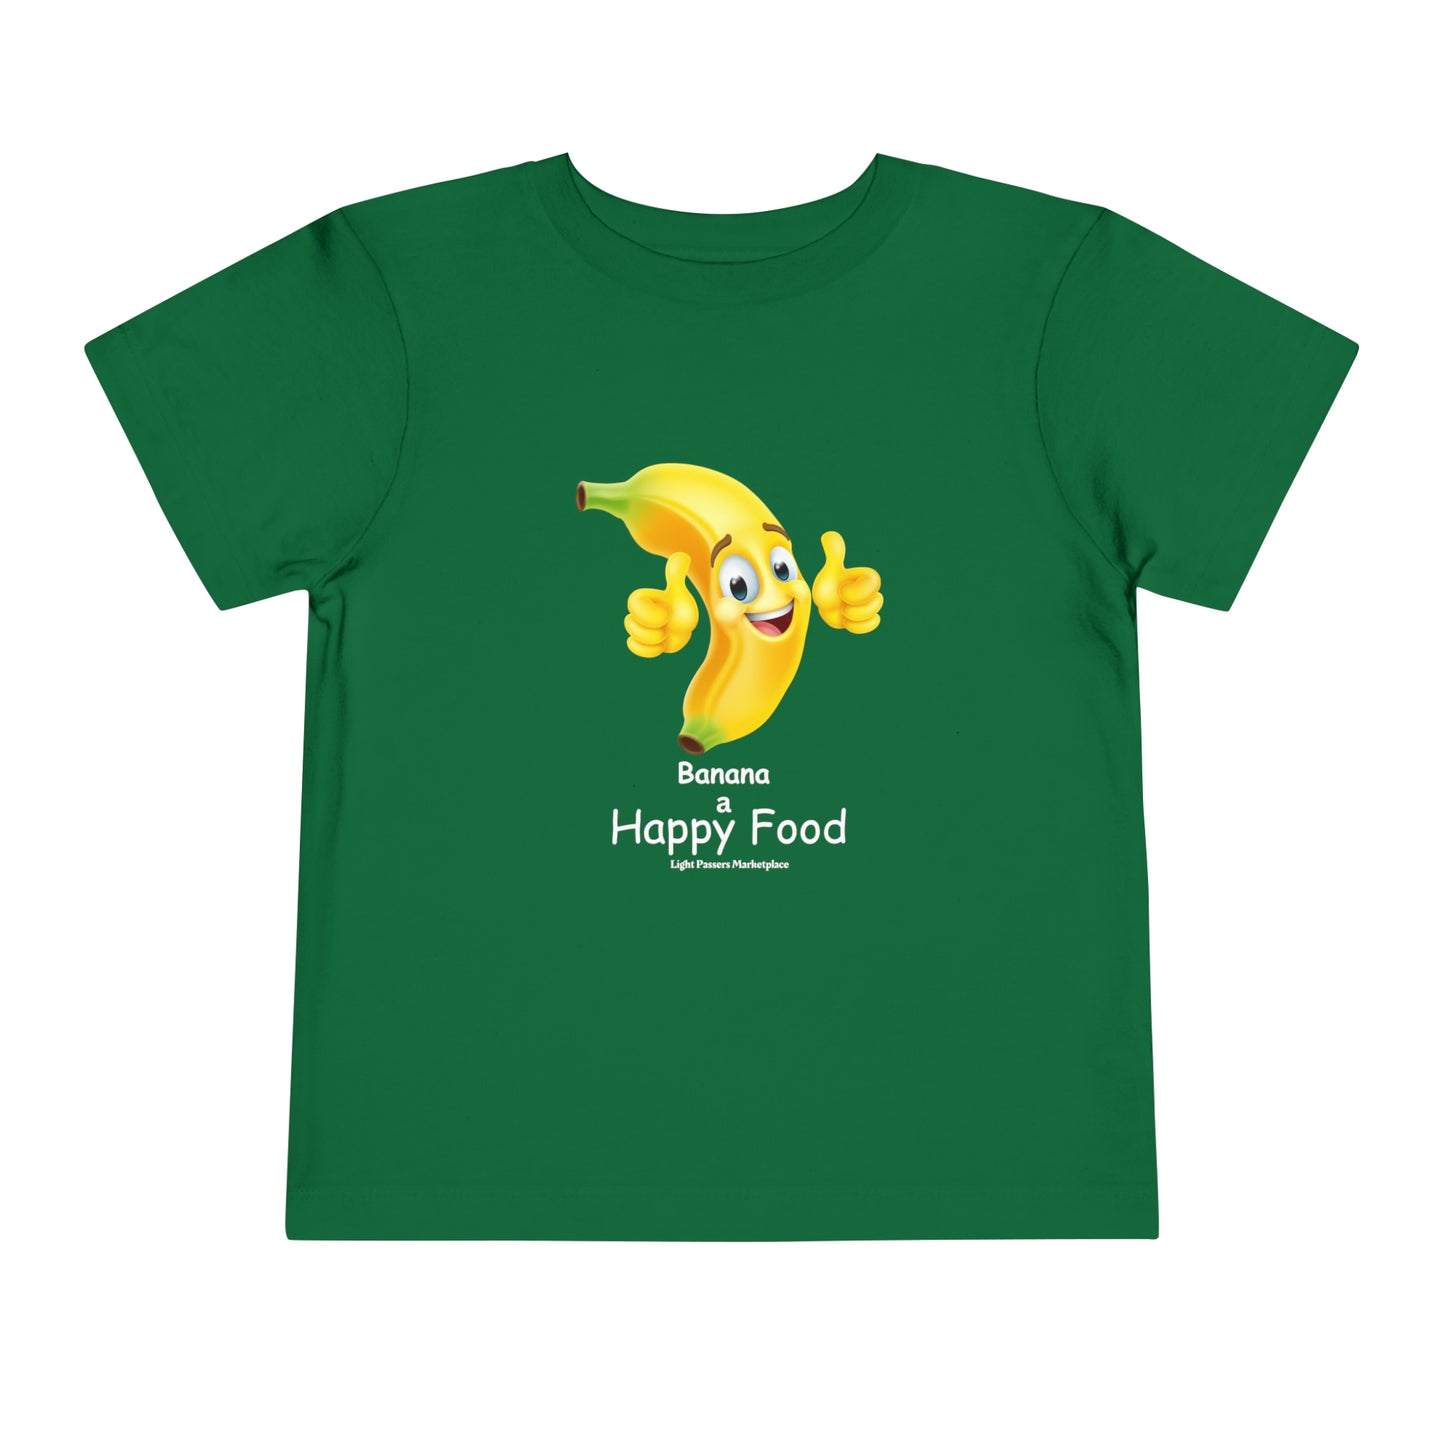 Light Passers Marketplace Banana Happy Food Toddler T-shirt Nutrition, Mental Health